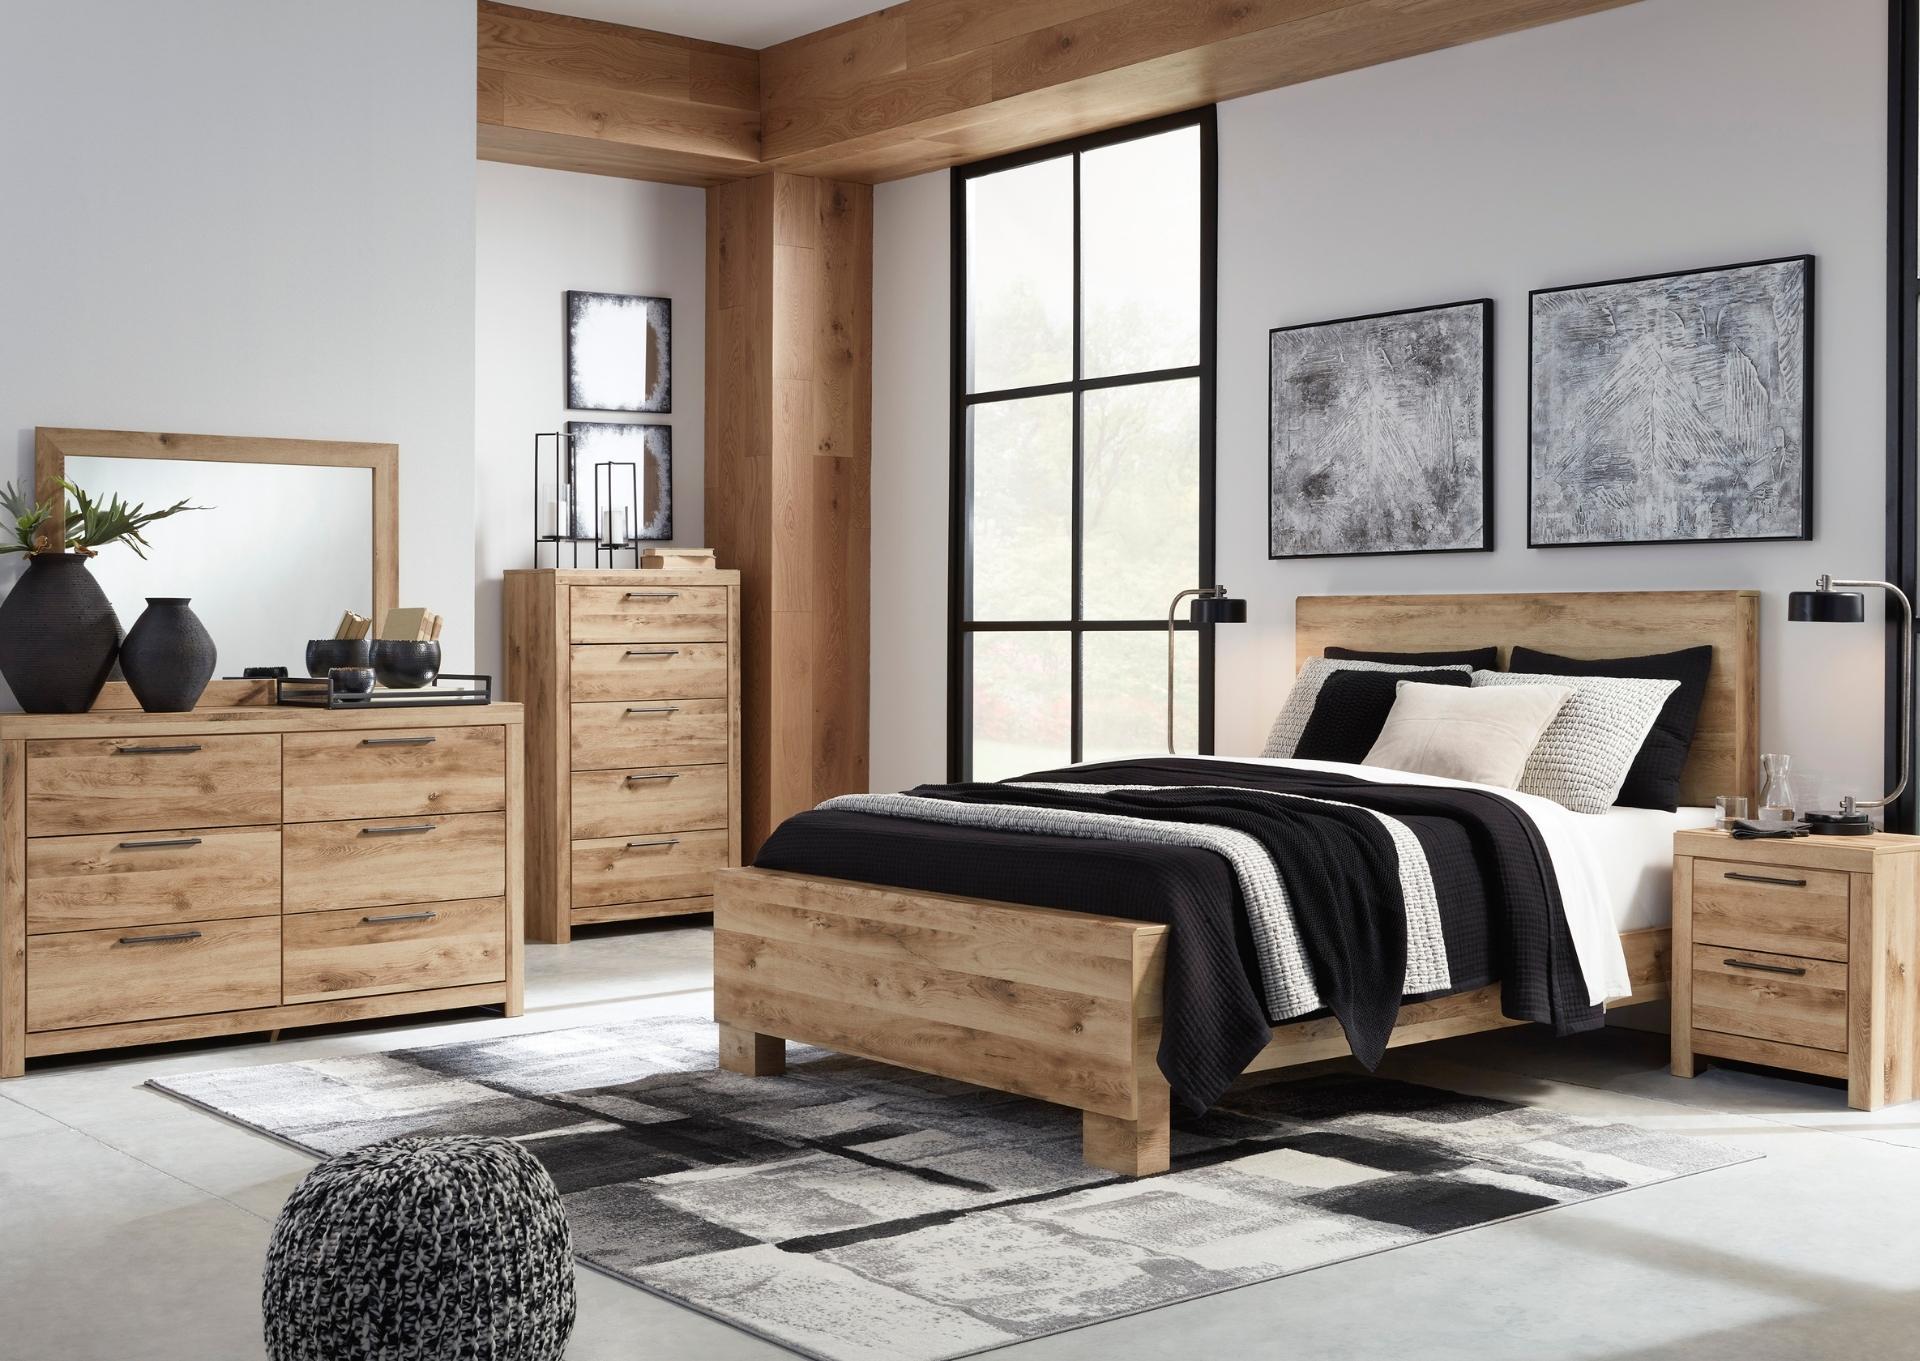 HYANNA QUEEN PANEL BED,ASHLEY FURNITURE INC.